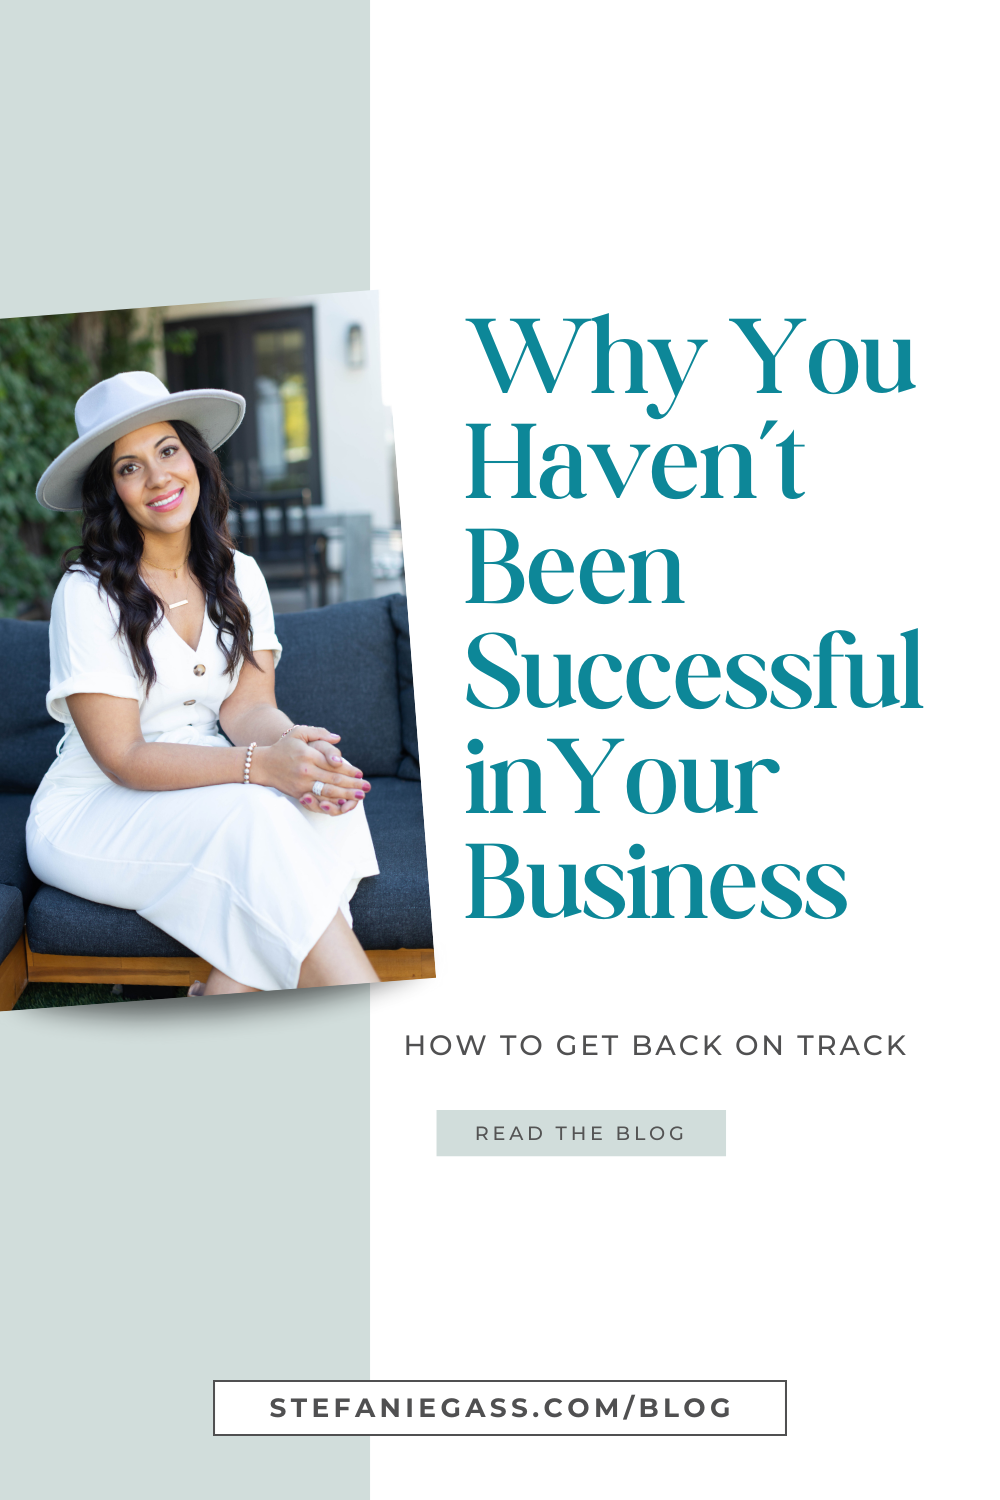 Image is a woman with dark hair wearing a white hat and a white dress. The text states " why you haven't been successful in your business how to get back on track. Read the blog.